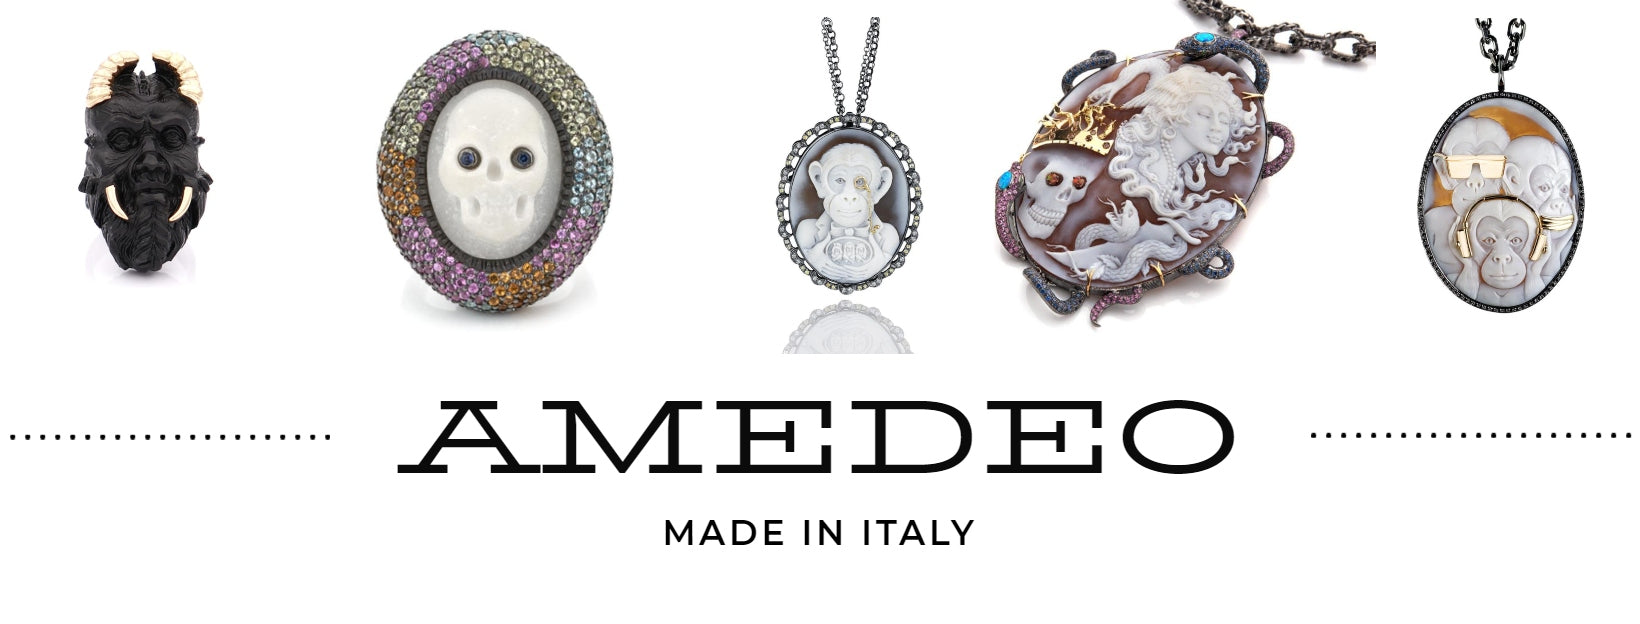 Cameo Jewellery l History and Popularity - Jordans Jewellers